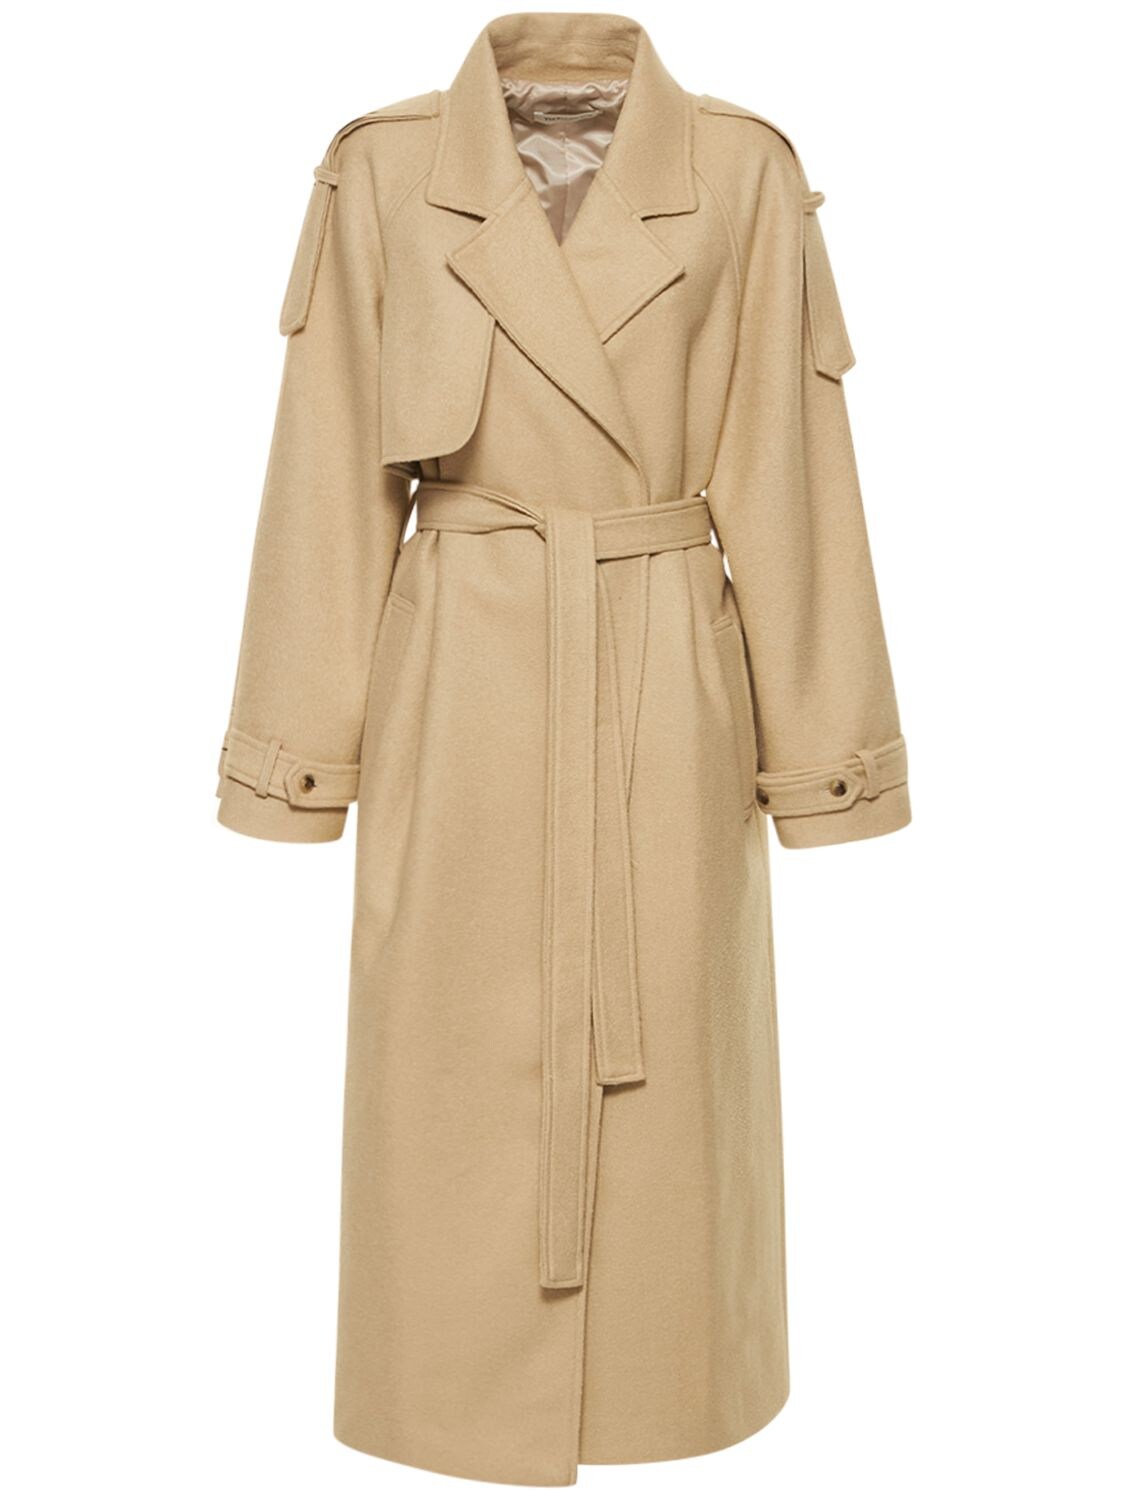 The Frankie Shop - Suzanne boiled wool trench coat - Beige | Luisaviaroma